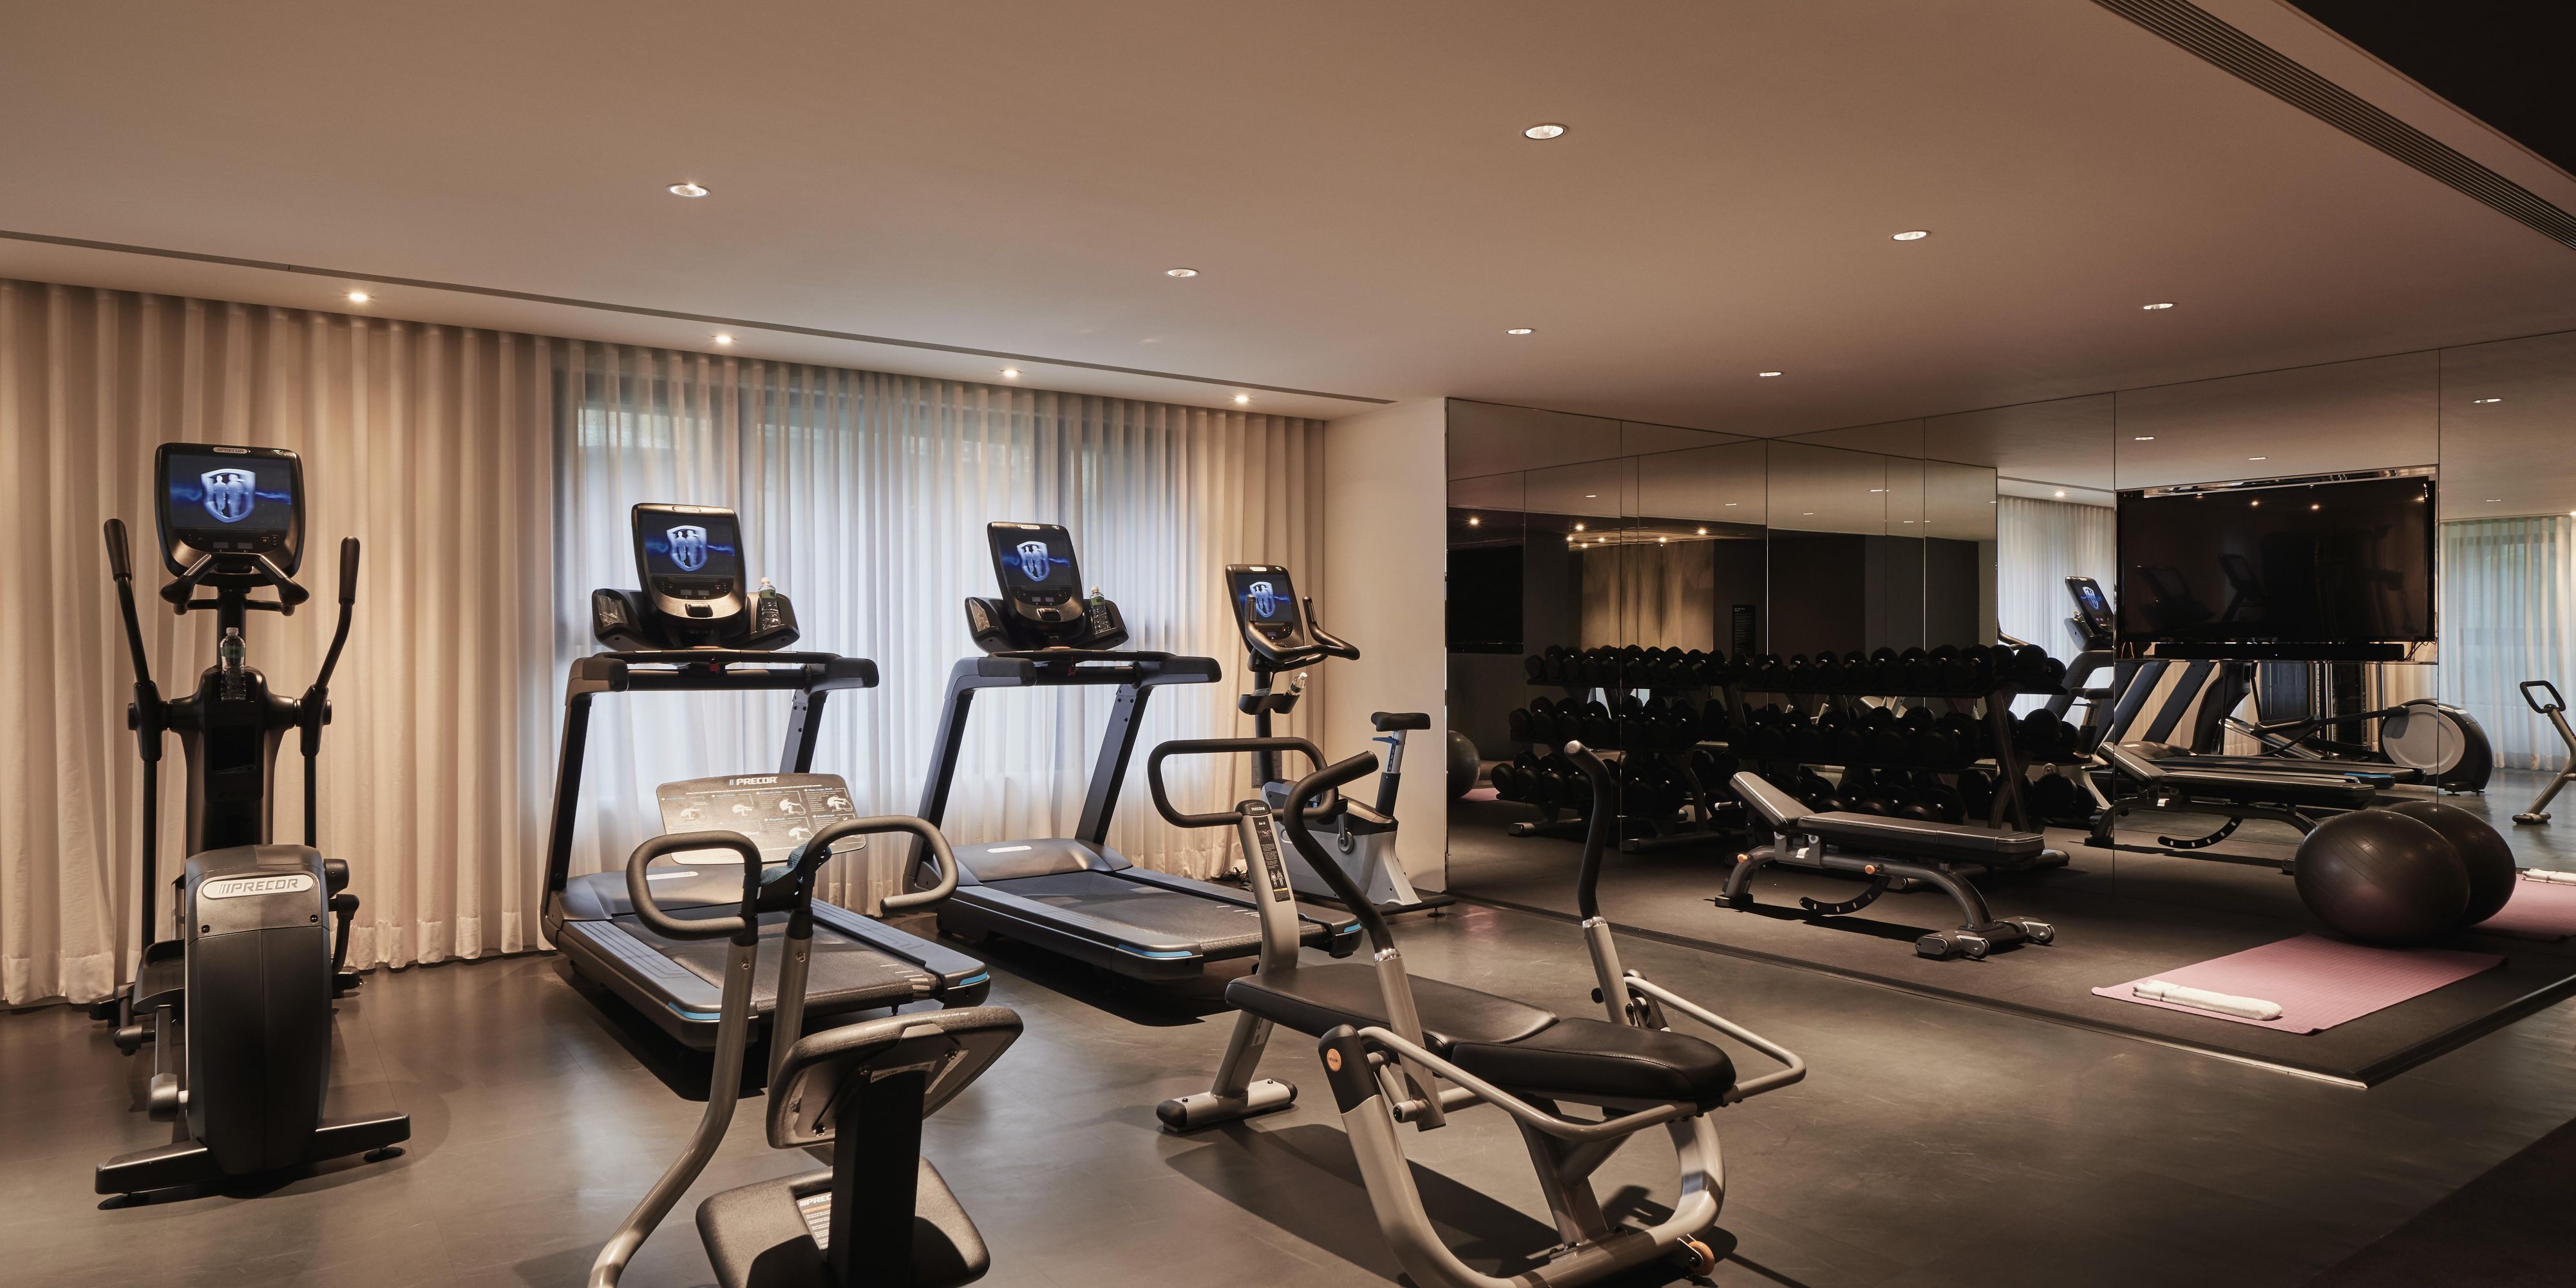 We know how stressful it is to be thrown off your workout routine. Our fitness center is equipped to get you back on track.
Our Fitness Center is located on Level 2 in Hotel, open 24 hours a day. Equipped with reliable equipment, as well as dumbbells and other contemporary gear. Please be advised that your room key card is required for access.